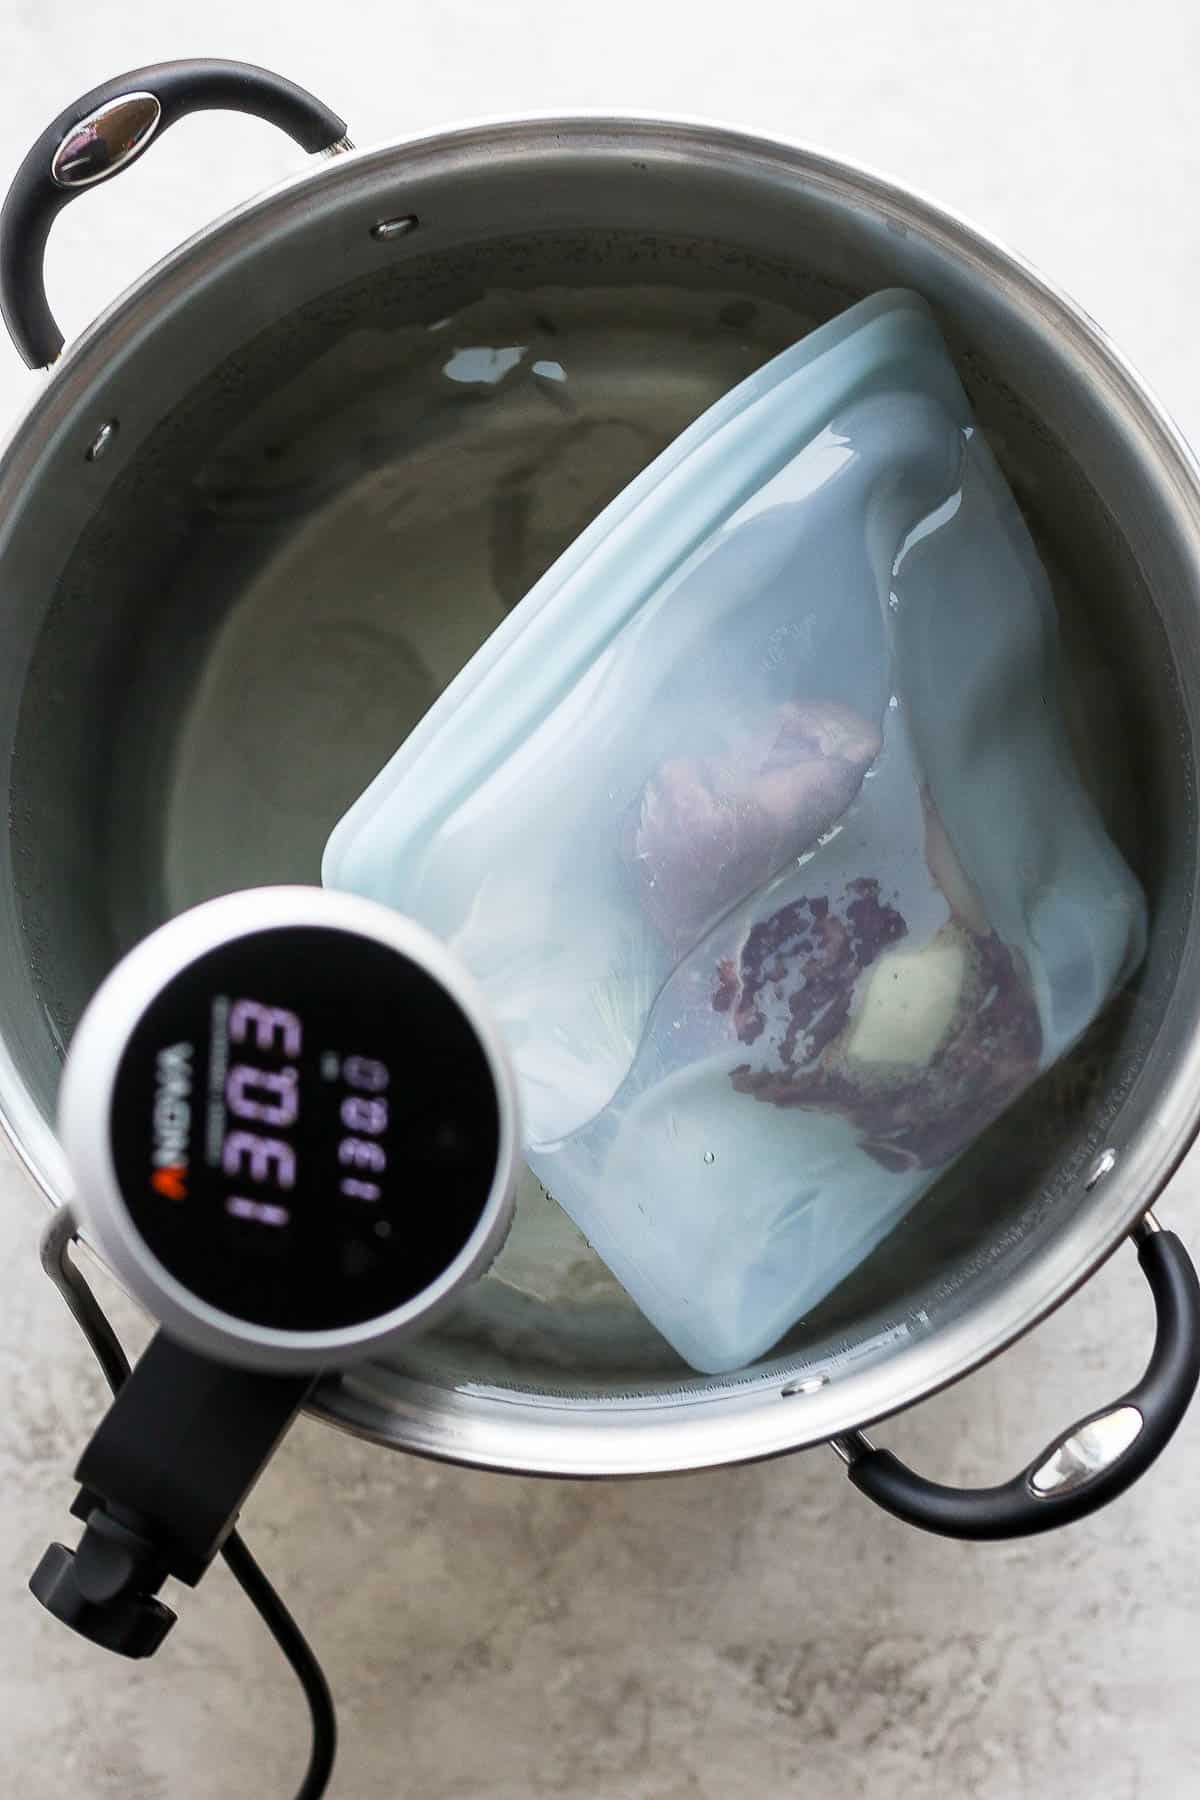 Plastic bag with steak submerged in the pot of water.